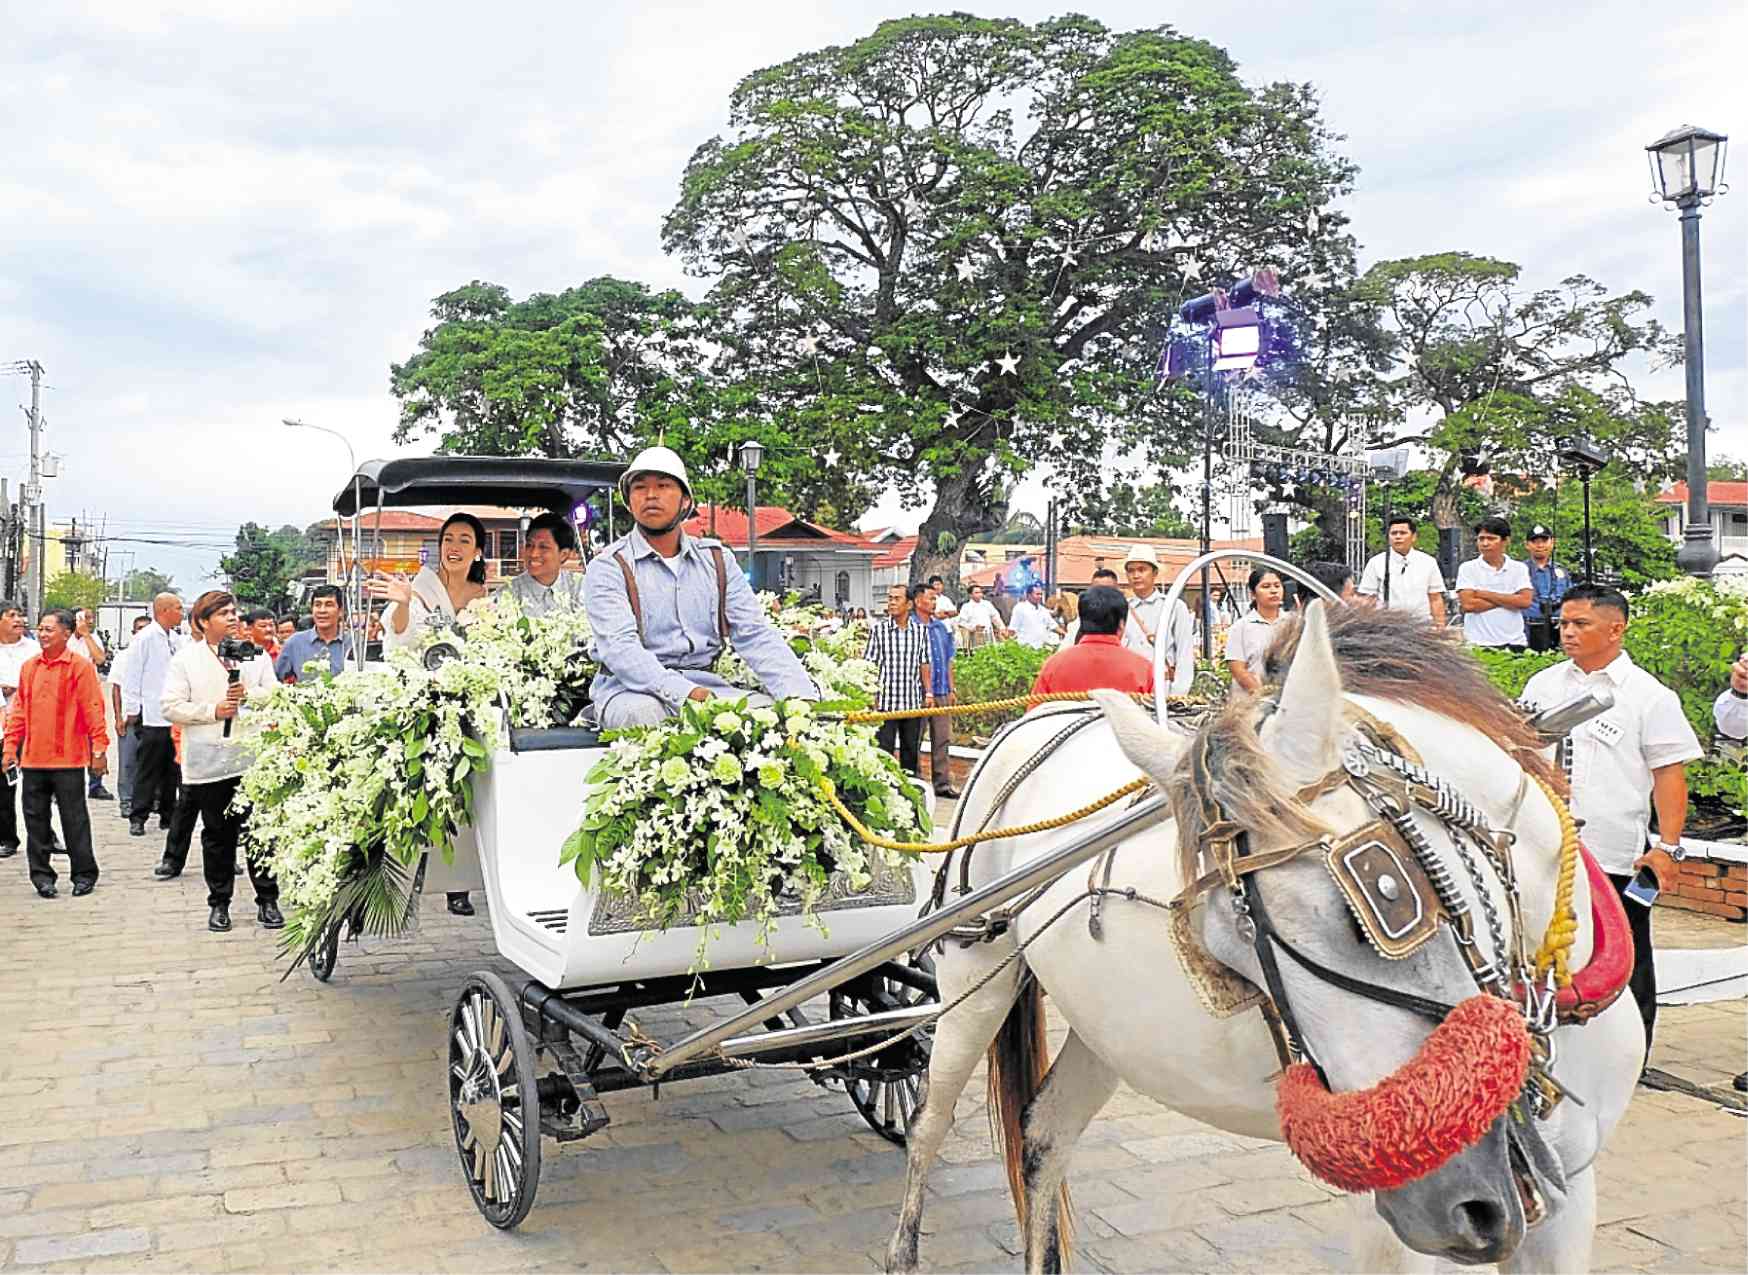 Aboard a horse-drawn carriage, Michael Ferdinand Marcos Manotoc and his bride Carina Amelia Gamboa Manglapus tour Paoay town in Ilocos Norte after a thanksgiving Mass that celebrated their union.—ILOCOS NORTE PROVINCIAL GOVERNMENT